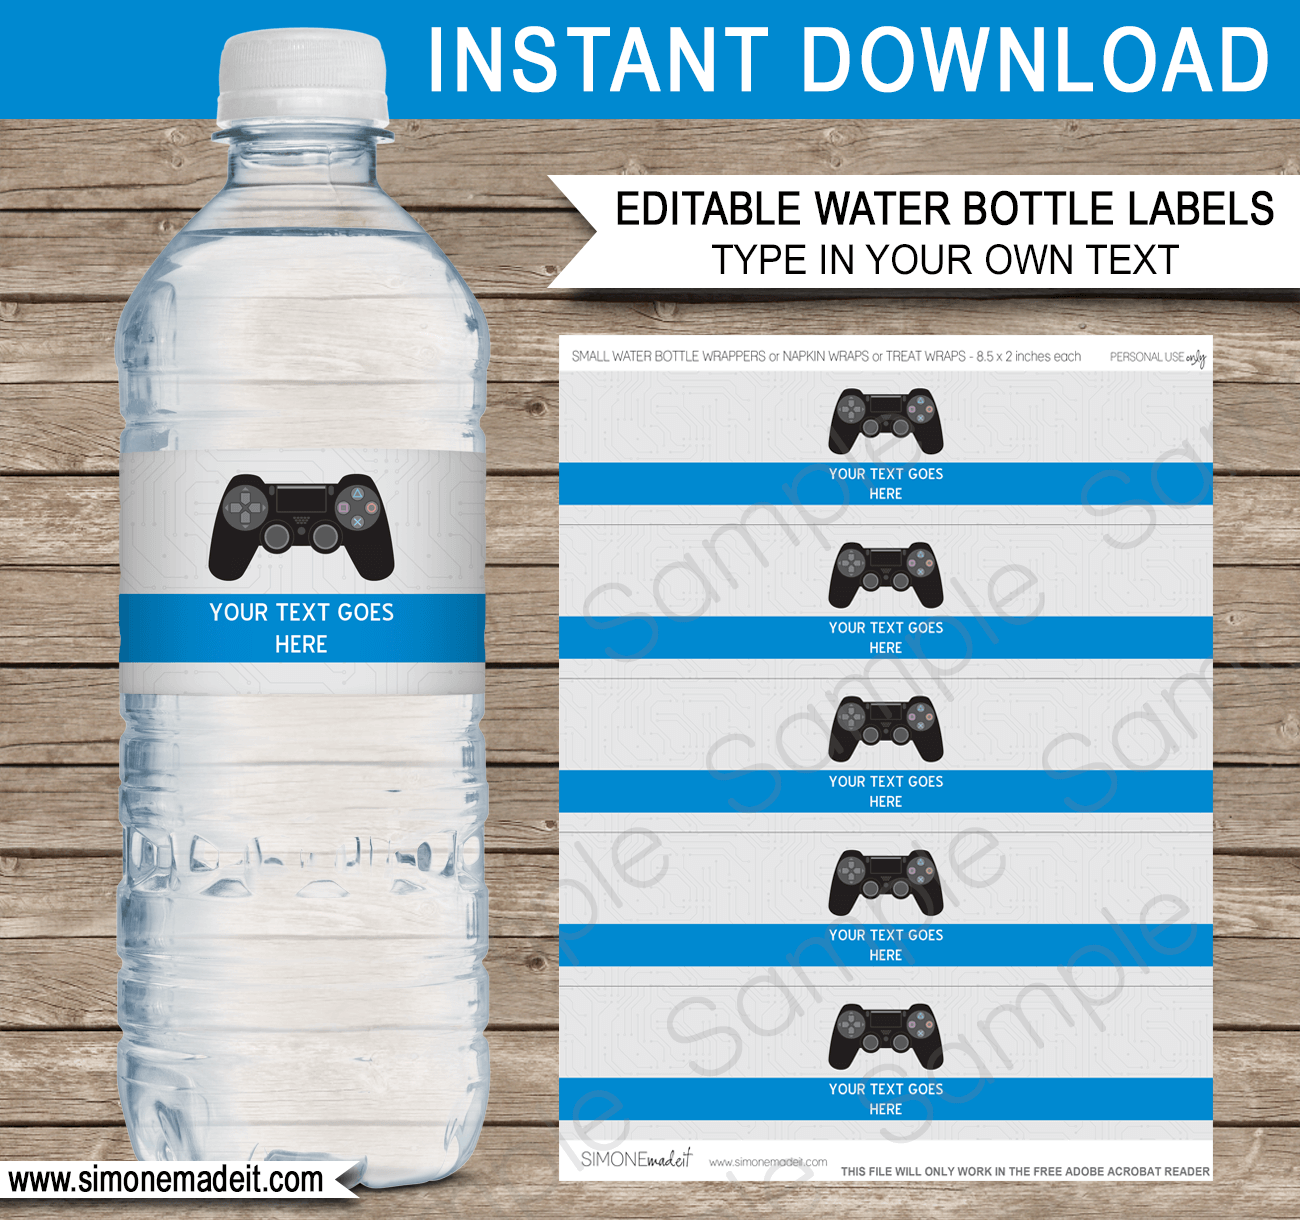 Printable Playstation Birthday Party Water Bottle Labels | Video Game Theme Birthday Party Template | Black Playstation Controller | Gamer | Napkin Wraps | Treat Wraps | INSTANT DOWNLOAD via simonemadeit.com